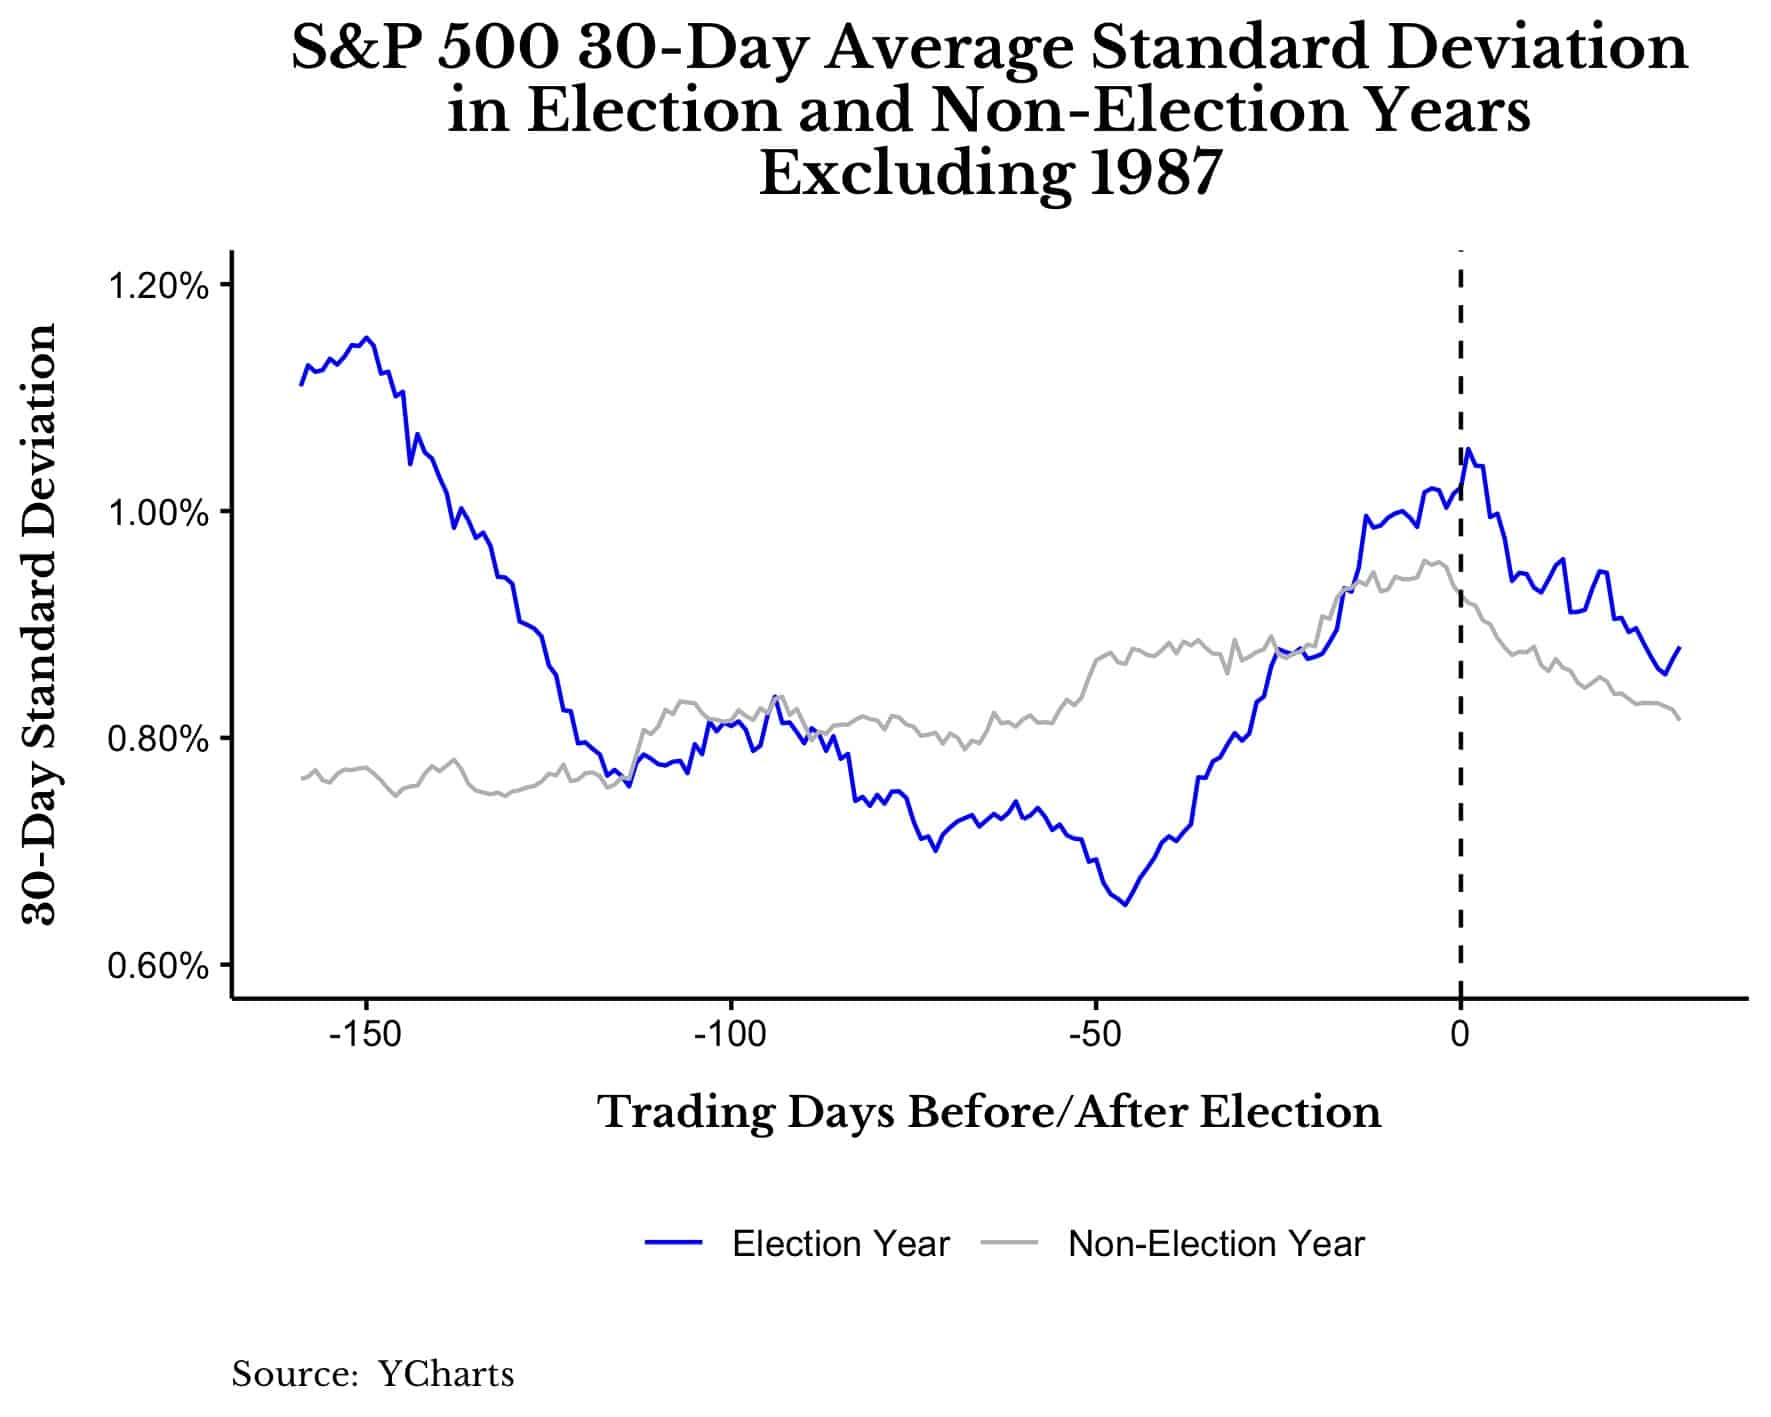 S&P 500 30-day standard deviation in election and non-election years, excluding 1987